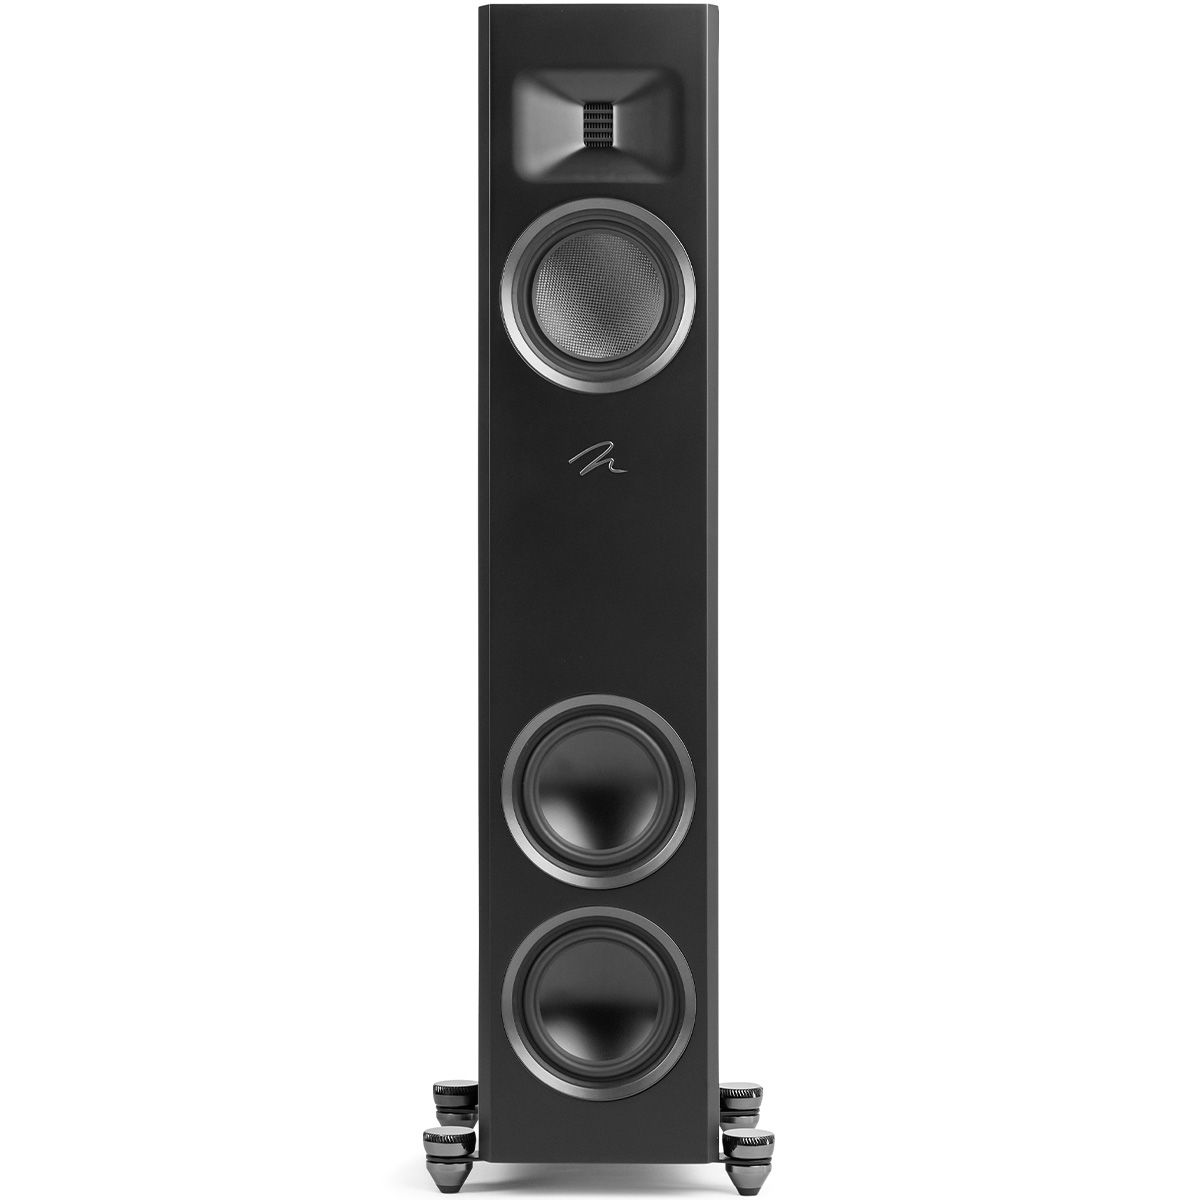 MartinLogan Motion XT F10  Floorstanding Speaker in black, front view without grilles on white background